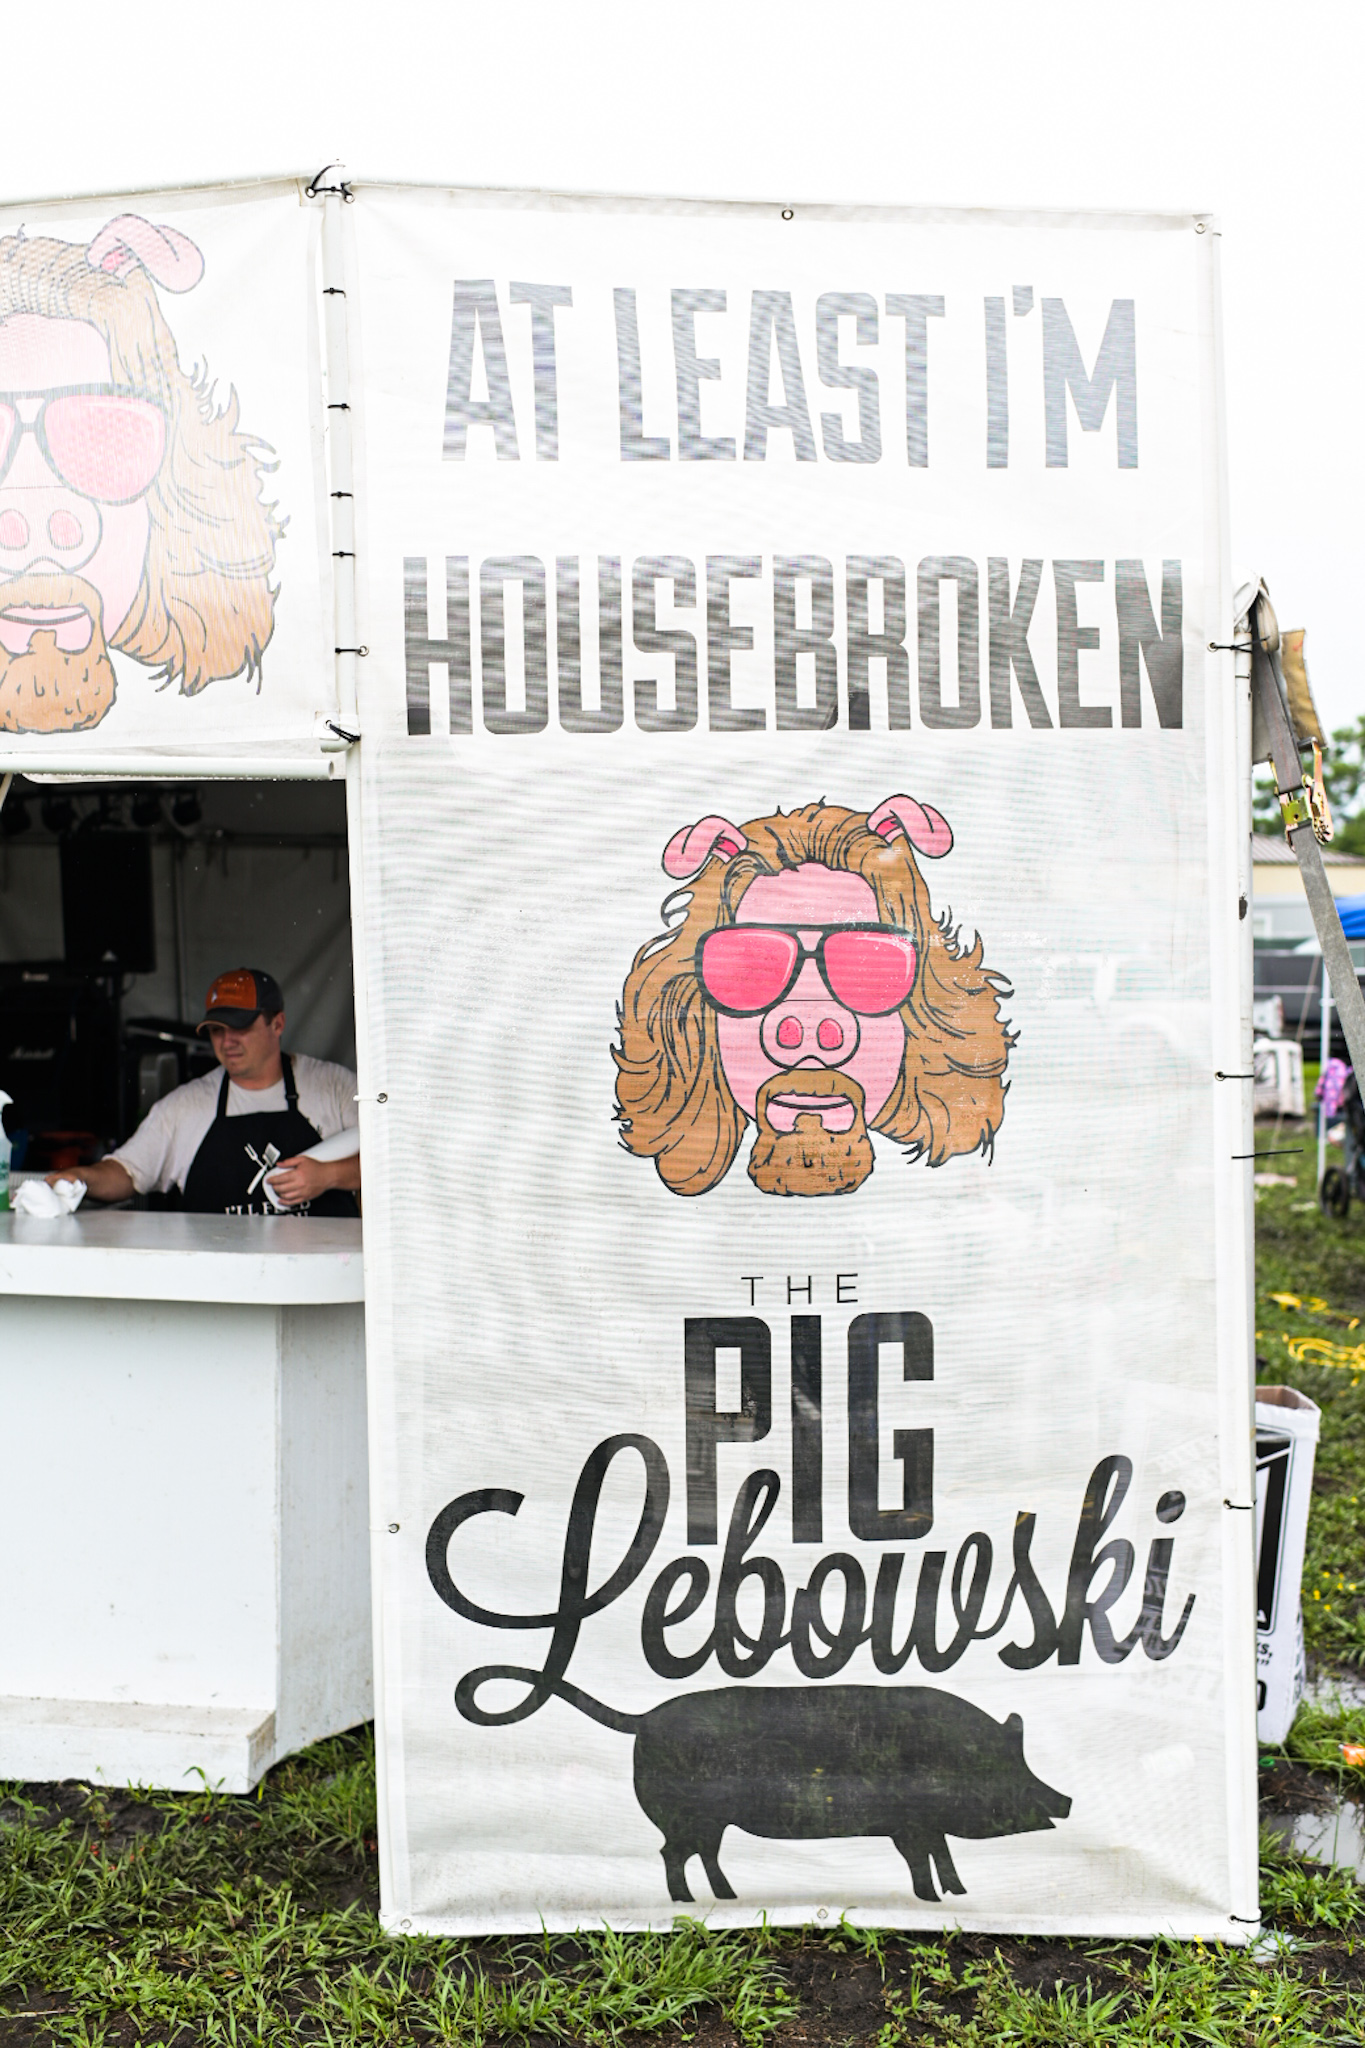 A sign from a competitor's booth - The Pig Lebowski